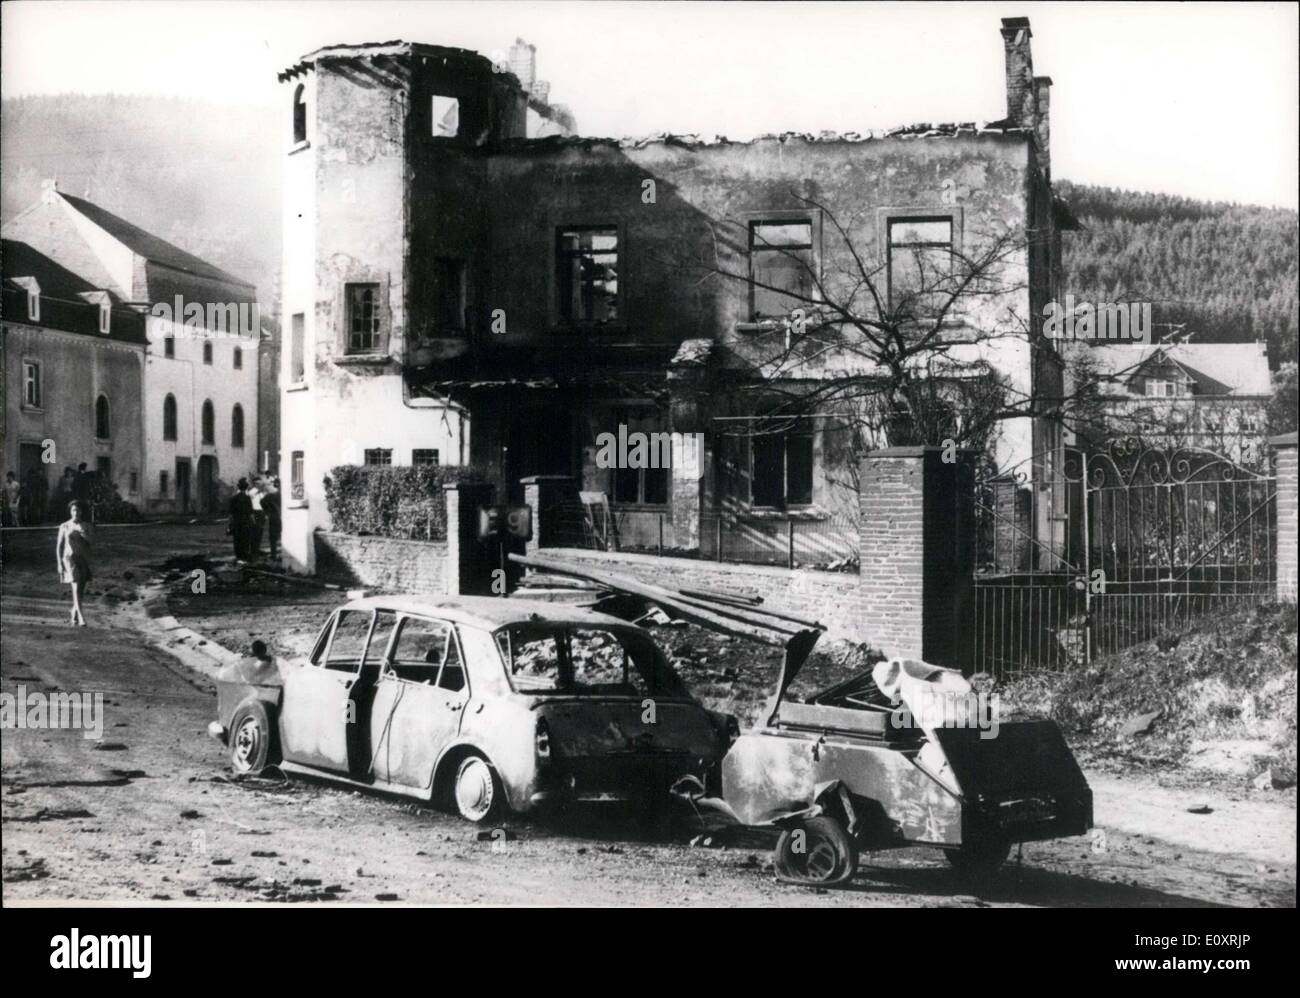 Aug. 22, 1967 - In Belgium, an explosion of a truck carrying 40,000 liters of liquid gas caused the deaths of 9 people. 34 people were injured, 5 of whom are in serious condition. About 15 homes were seriously damaged and cars went up in flames. Dutch people were inside the car pictured and burned to death. Stock Photo